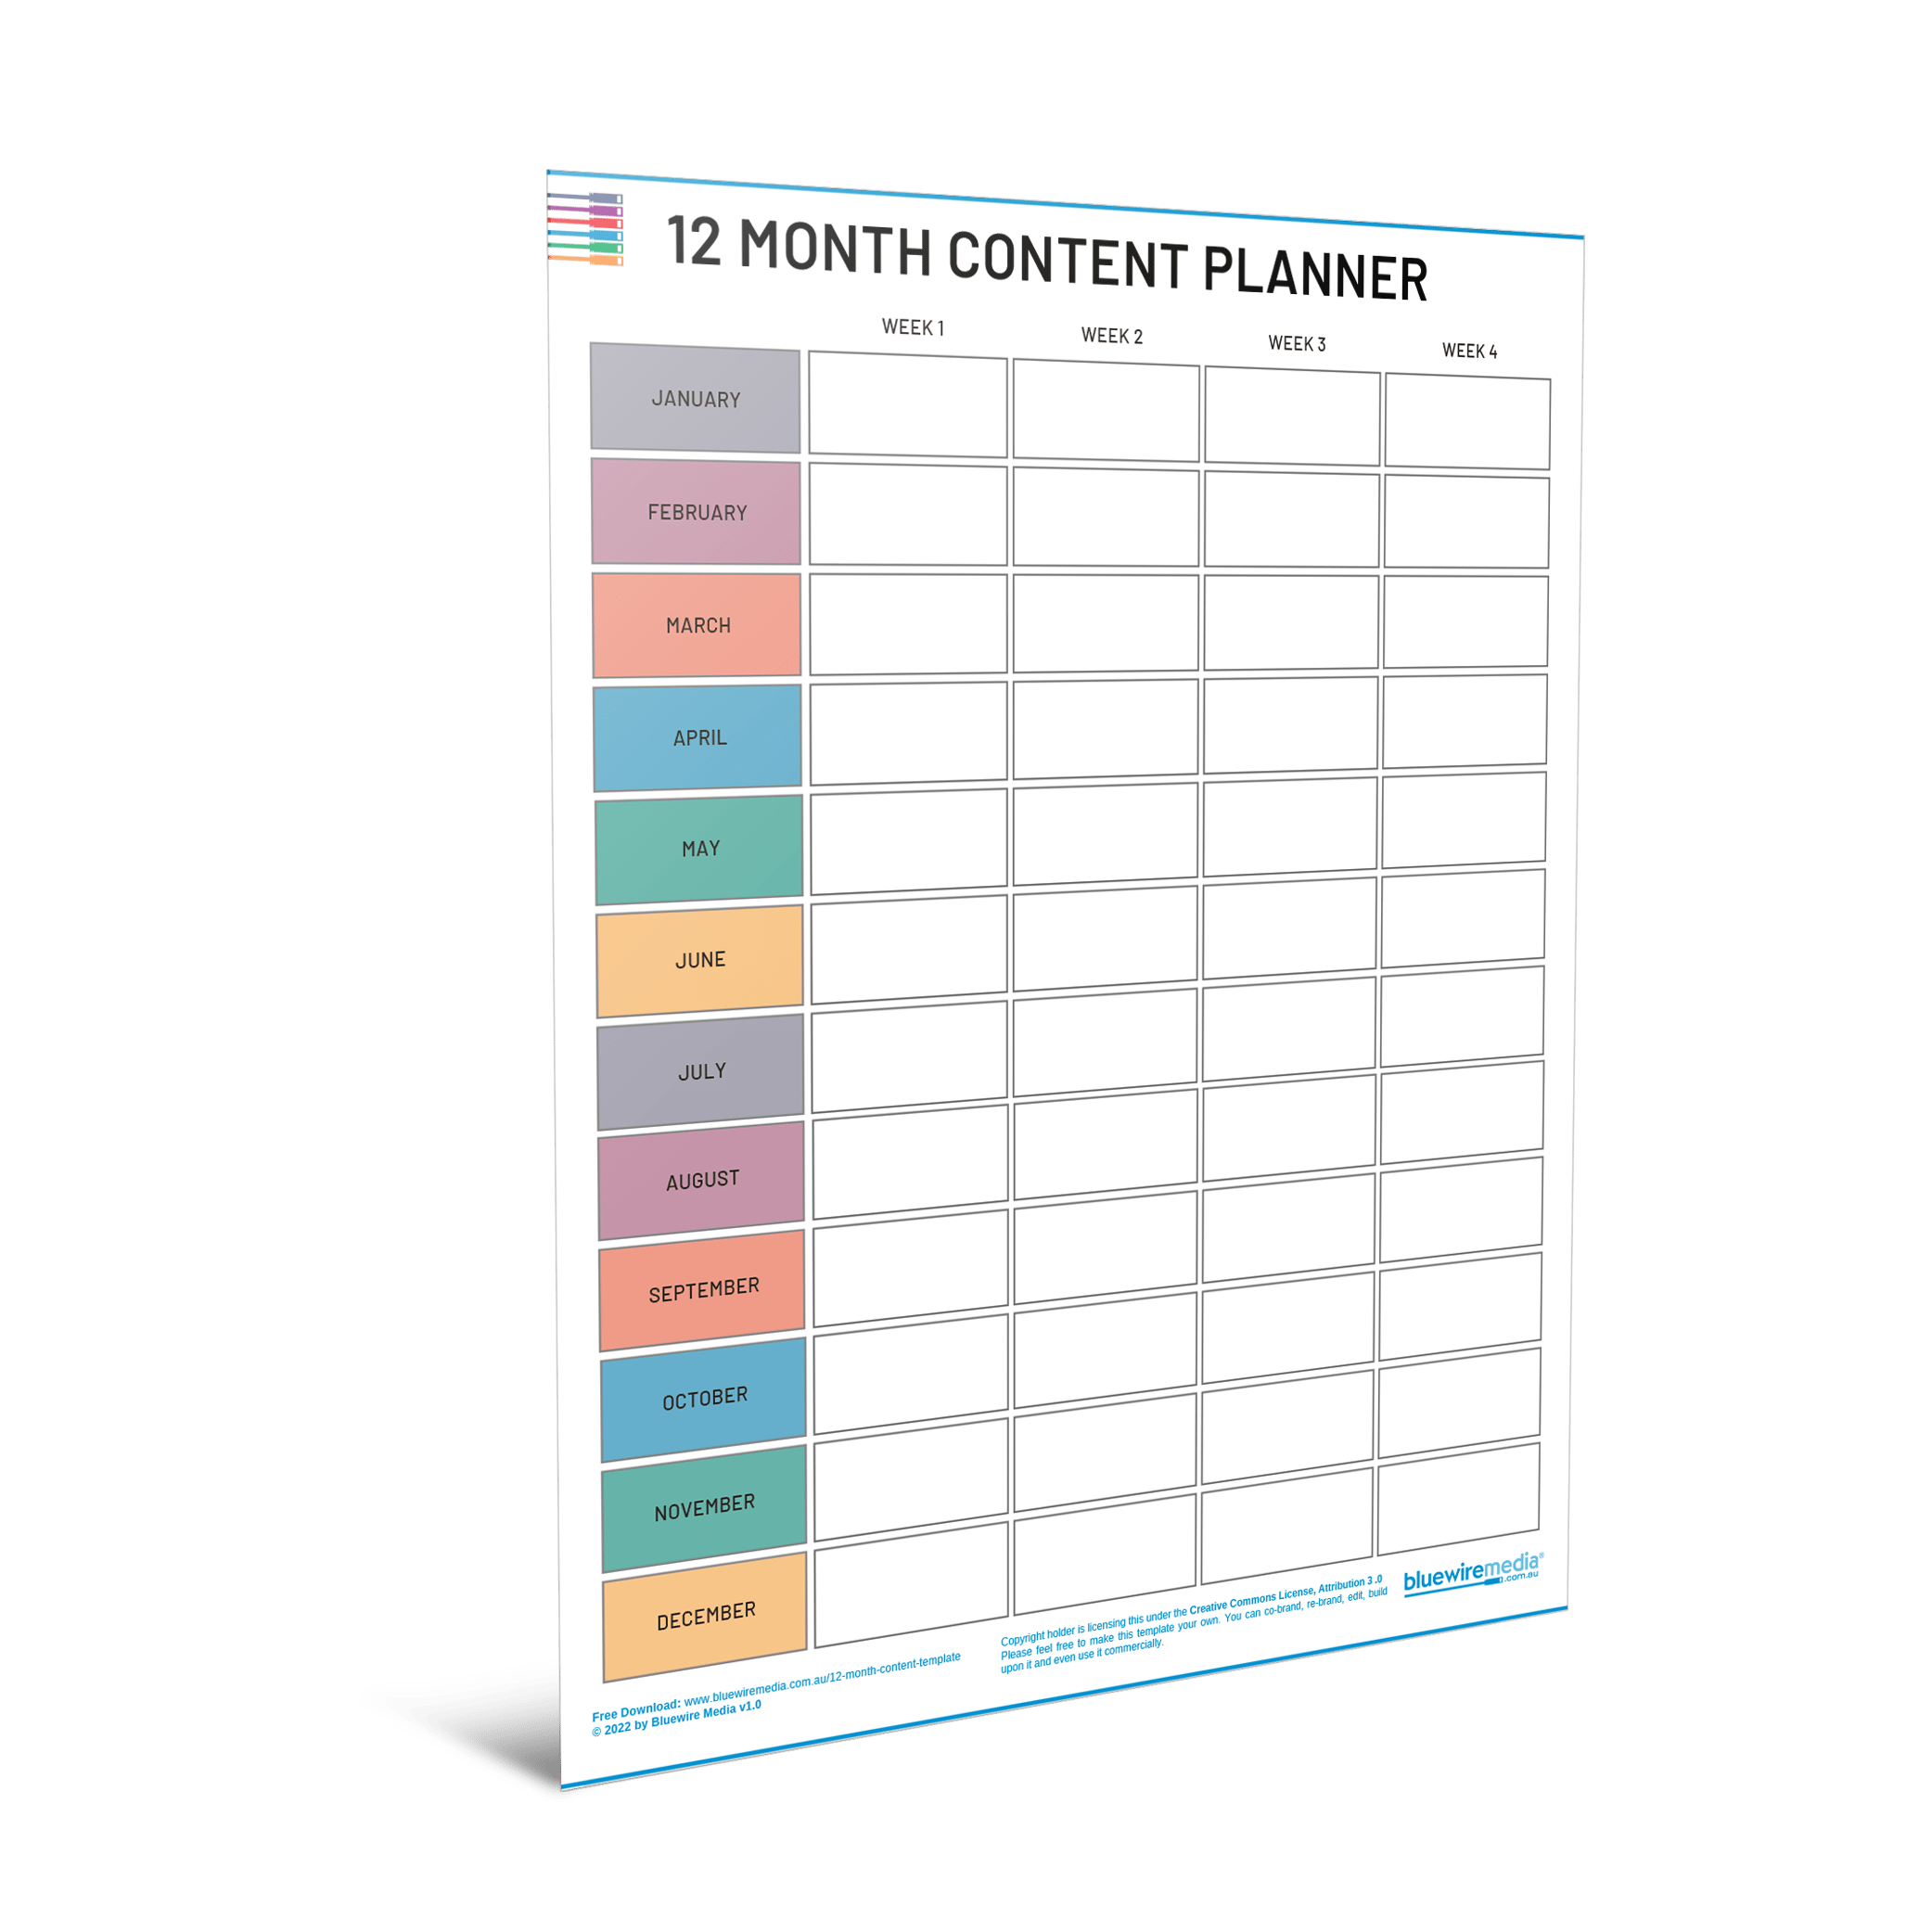 12 Month Content Planner